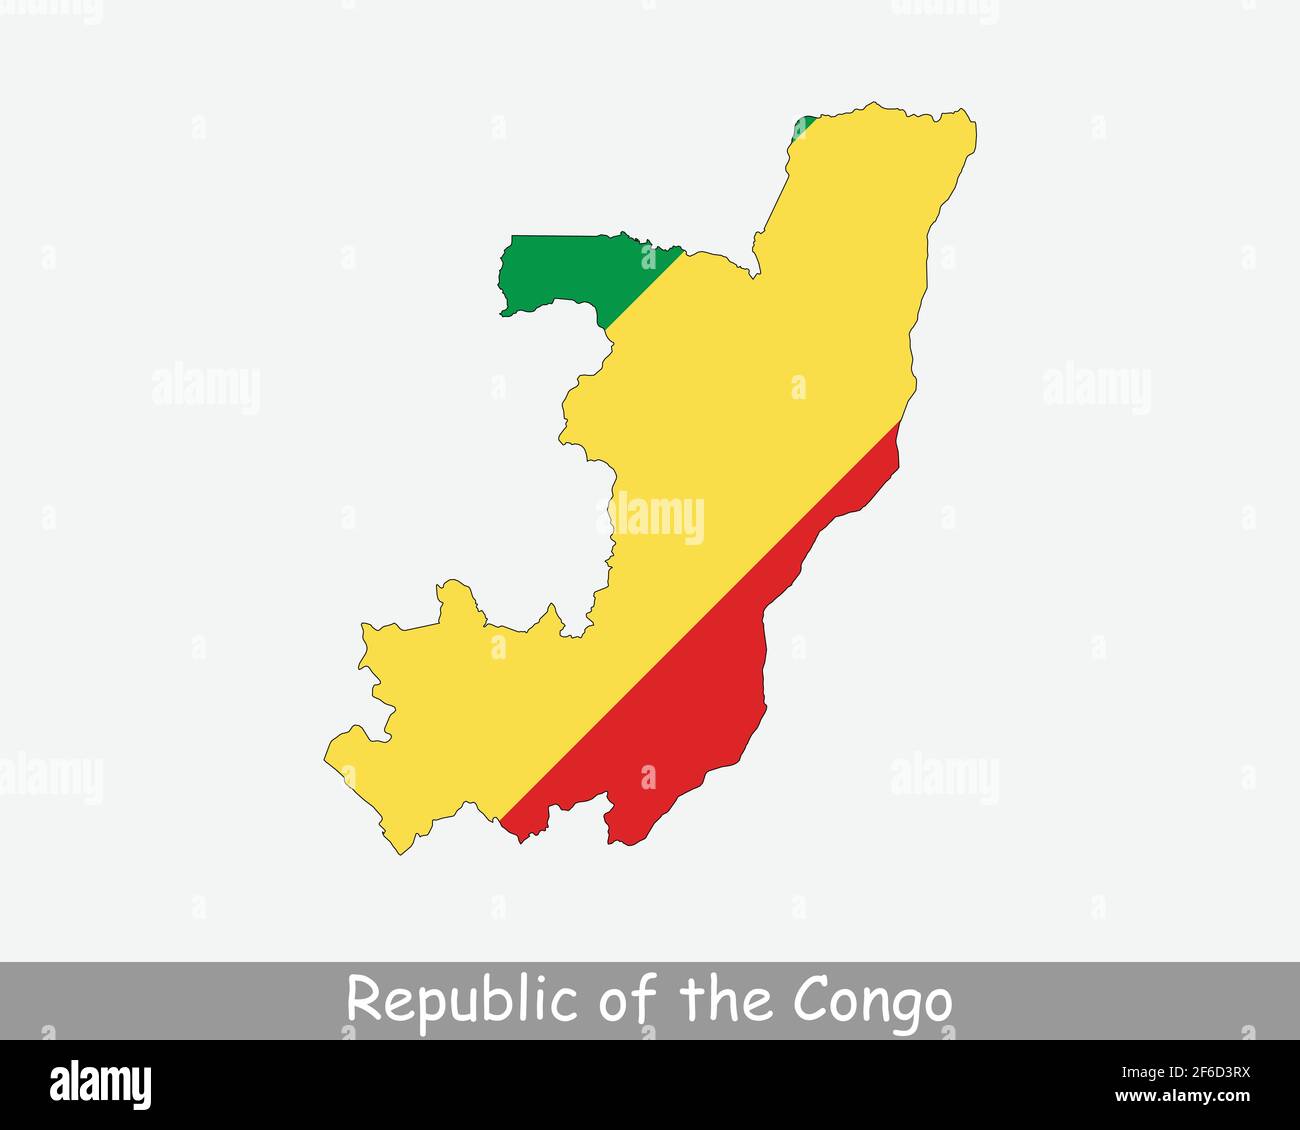 Republic of the Congo Flag Map. Map of Congo-Brazzaville with the